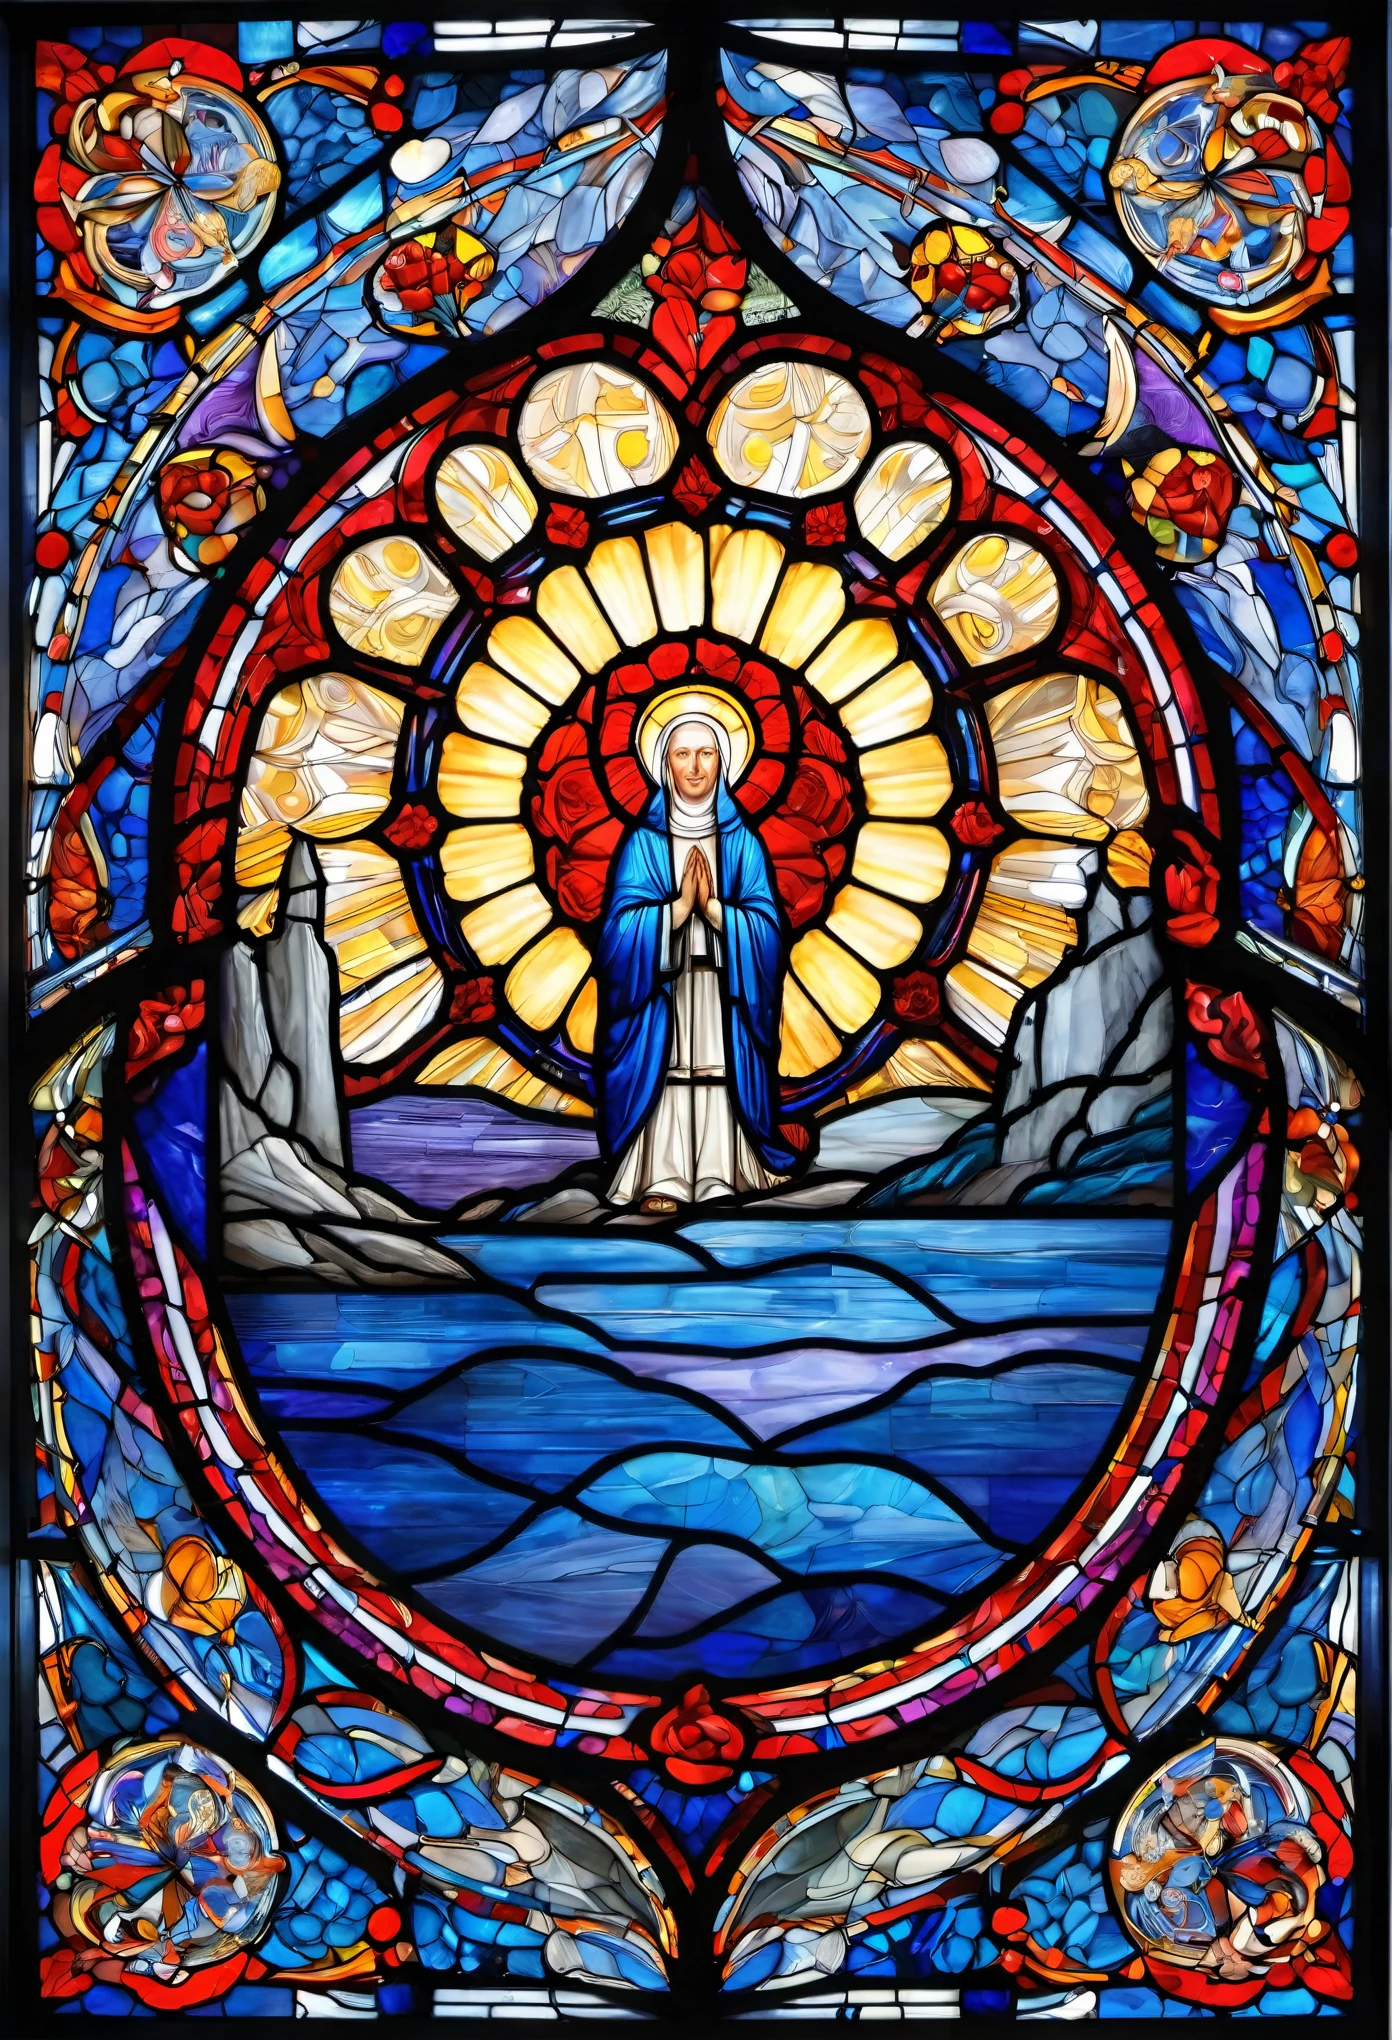 Nun,praying,The image depicts a vibrant and captivating rose window, a circular design that exudes a sense of both elegance and enchantment. Composed primarily of blue, purple, and red hues, the window exudes a sense of warmth and richness, evoking a feeling of deep contentment and peace.The window's circular shape symbolizes wholeness, unity, and infinity, reinforcing its role as a focal point for meditation and reflection. The blues and purples suggest a serene and calm energy, while the reds impart a sense of passion and warmth. The combination of these colors creates a harmonious balance that is both invigorating and soothing.The window is embellished with various small patterns and designs, each one unique and distinctive. These patterns add depth and intricacy to the window's overall appearance, enhancing its visual impact. They are reminiscent of petals, leaves, and other natural elements, connecting the window to the natural world and the cycles of life.The rose window is a traditional element of Gothic architecture, often found in cathedrals and other ecclesiastical buildings. It was designed to capture and redirect natural light in order to create a dazzling effect, enhancing the sacredness of the space. Today, it continues to inspire wonder and reflection among those who gaze upon it,completing the stable diffusion of serenity and contentment,masterpiece, best